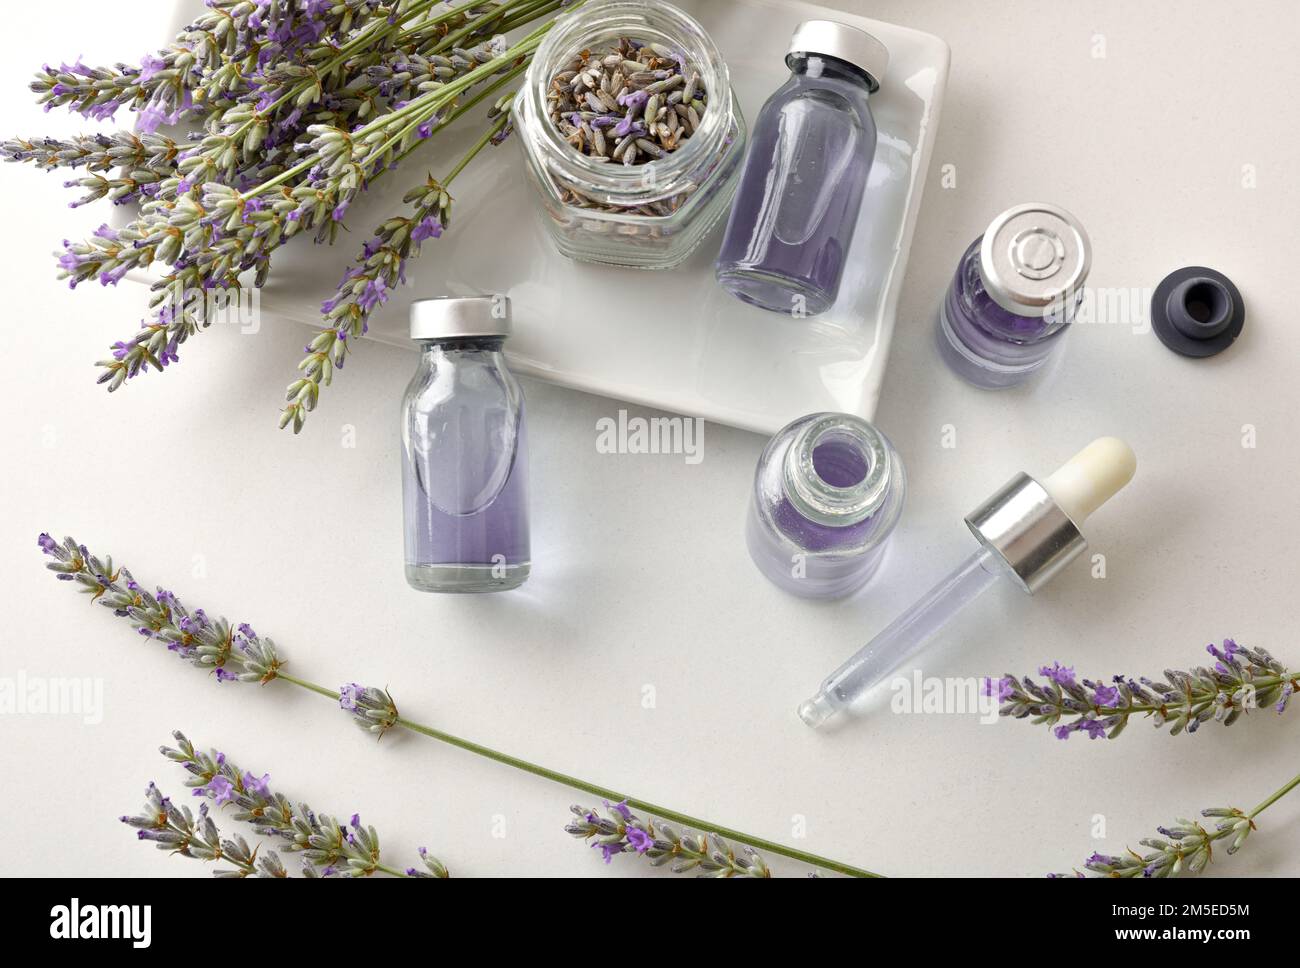 Preparation of lavender essences in bottles on white table with spikes in flower around. Top view. Horizontal composition. Stock Photo